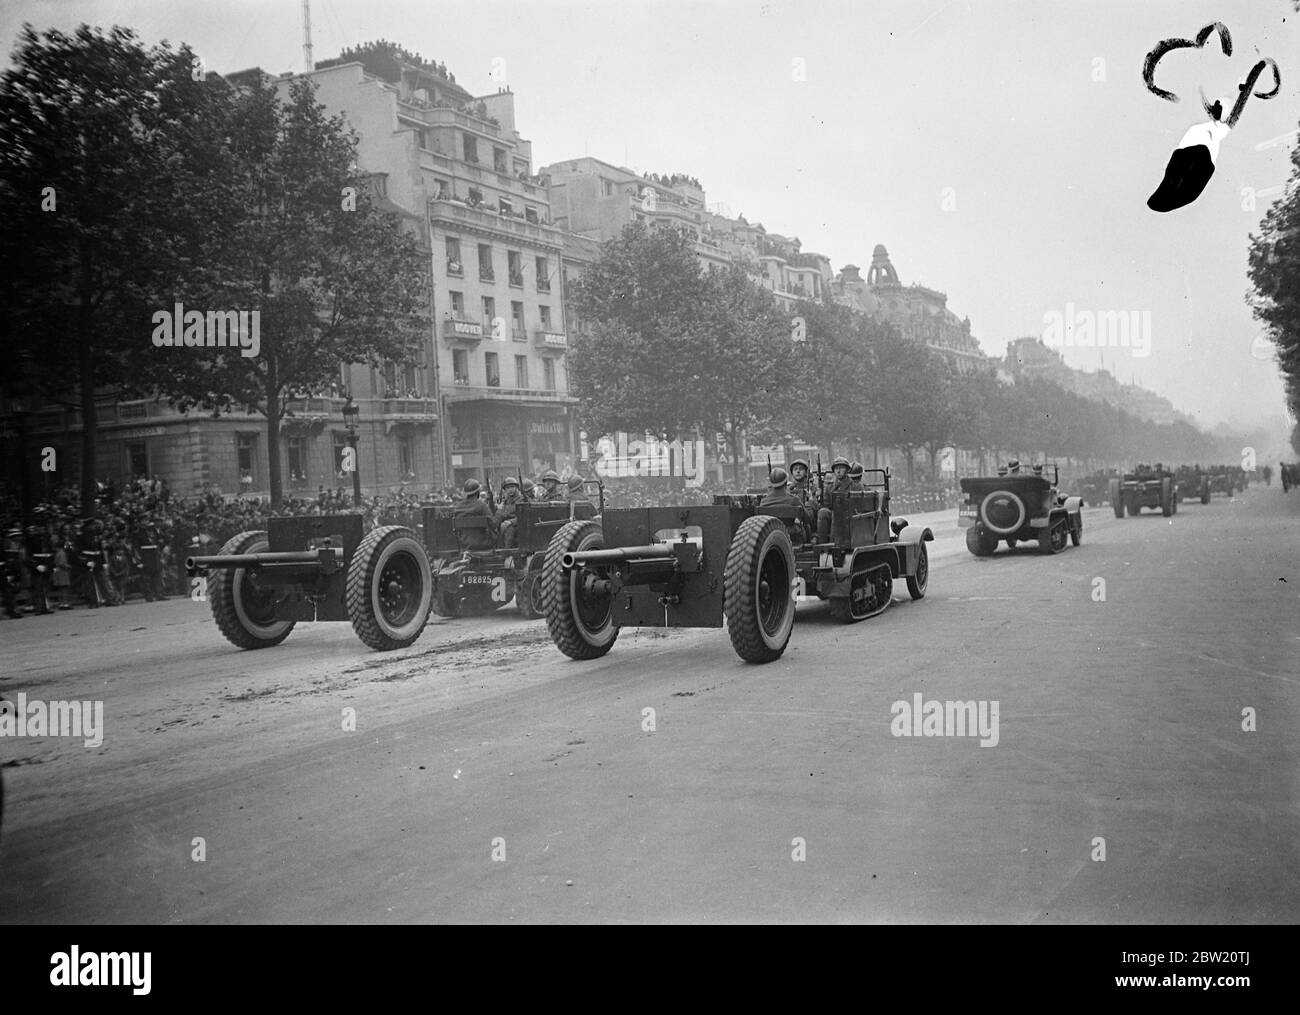 Heavy artillery line the streets of Paris, Commemorating the 148th anniversary of the fall of Bastille in the French revolution a million workers passed through Paris in the July demonstration. President Lebrun, King Carol of Romania and Sultan Sidi of Moroco watched the parade near the Arc de Triomphe. 14 July 1937. Stock Photo